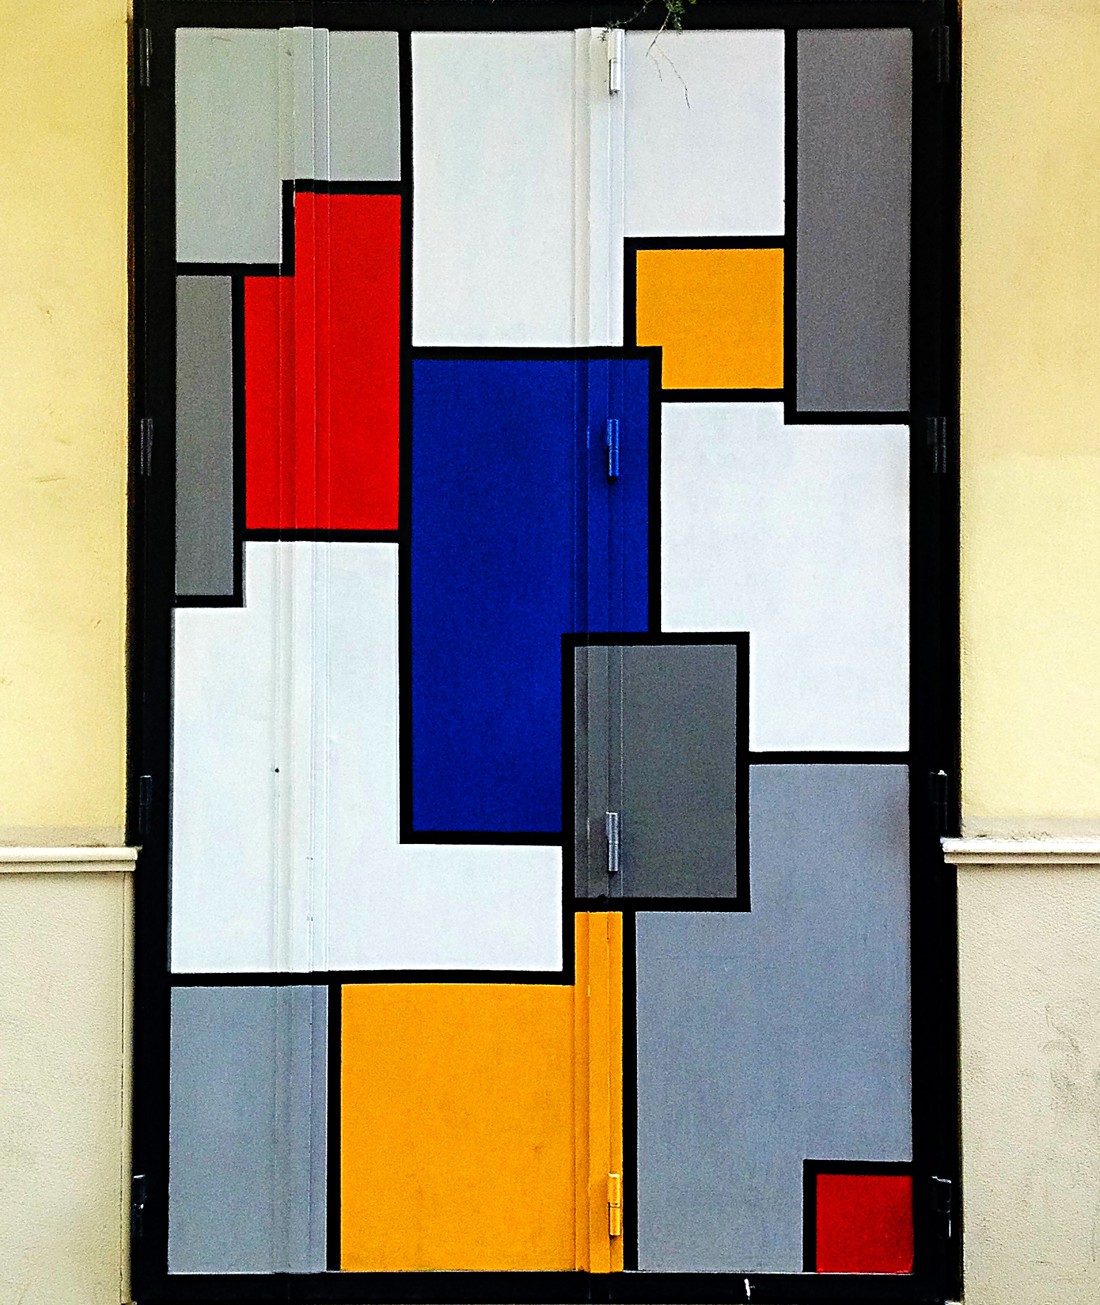 Street Art in El Carmen, Valencia, Spain - An adaption of the Composition series by Piet Mondrian painted on a window.